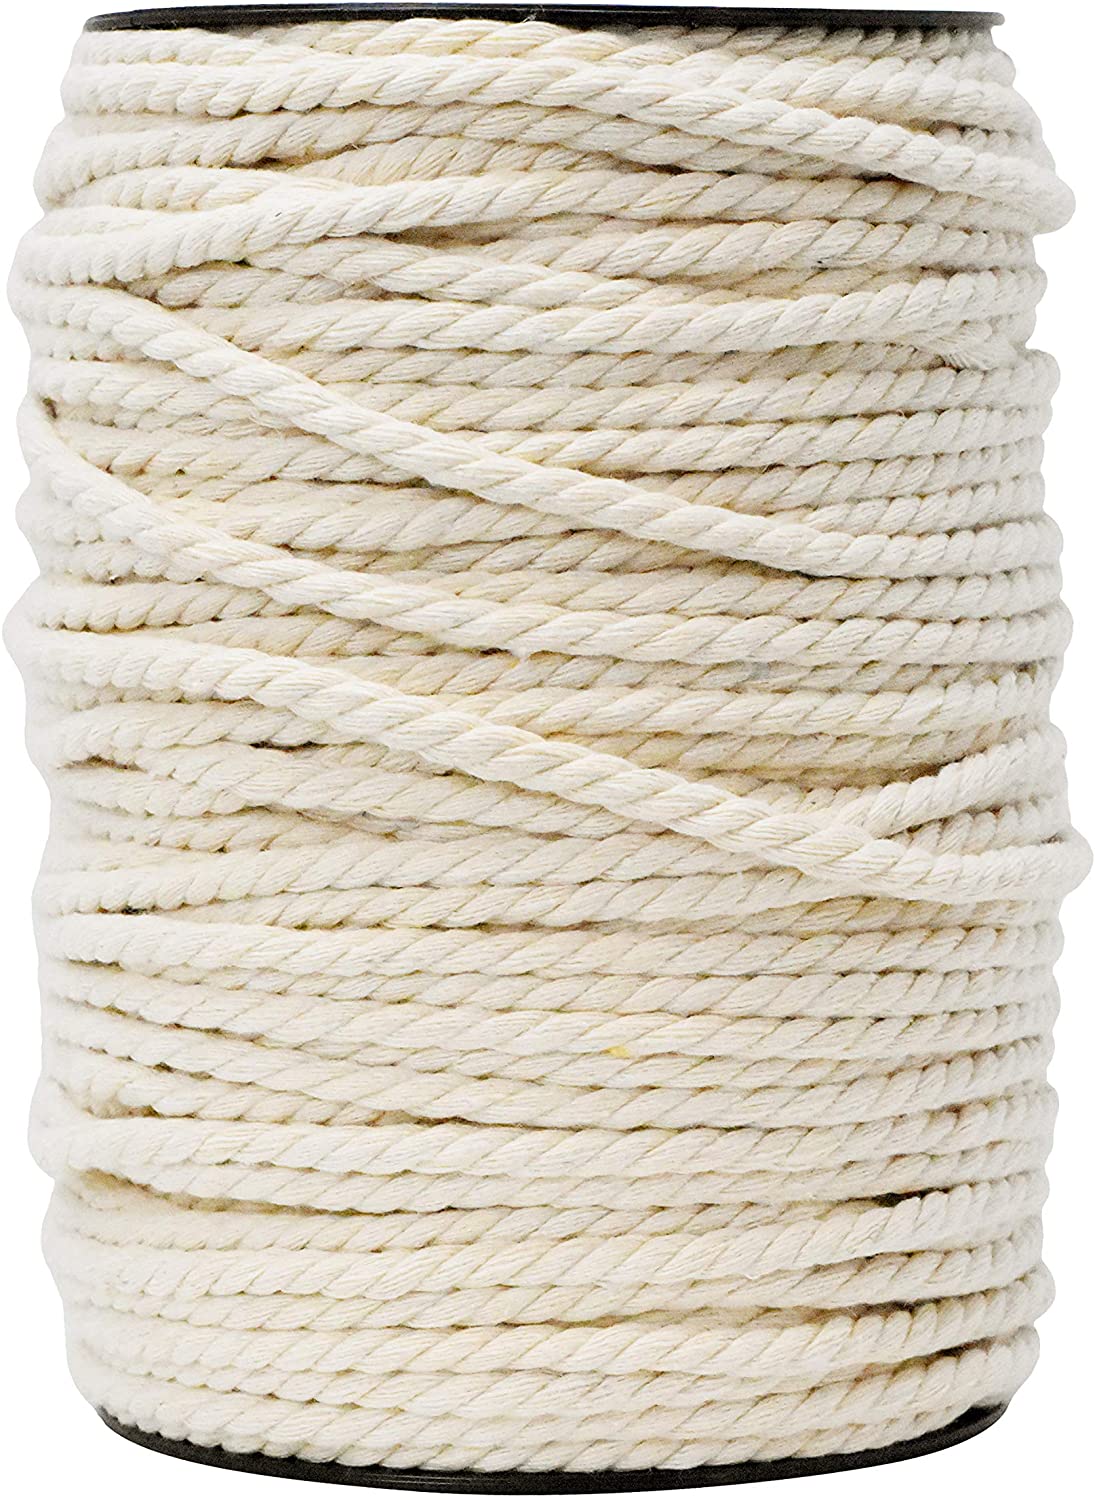 VMPS Cotton Cord, (5MM x 100 Meter) Natural Cotton Rope Cotton Twine String  3 Strand Twisted Cotton Cord Craft String for Wall Hanging, Plant Hangers